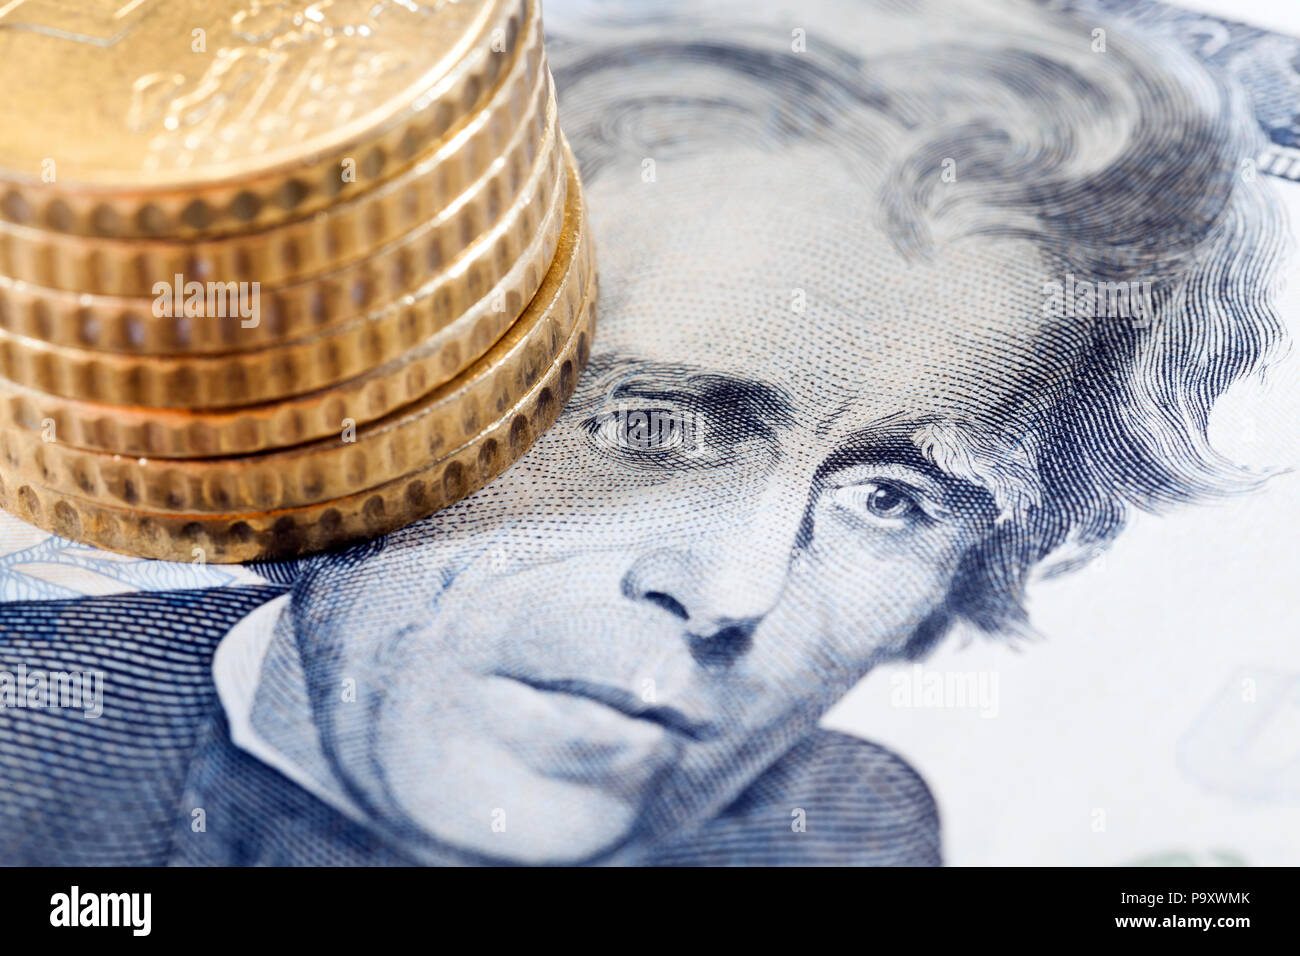 The obverse of the denominations of twenty American dollars and golden coins lying near the President portrait, a closeup photo Stock Photo